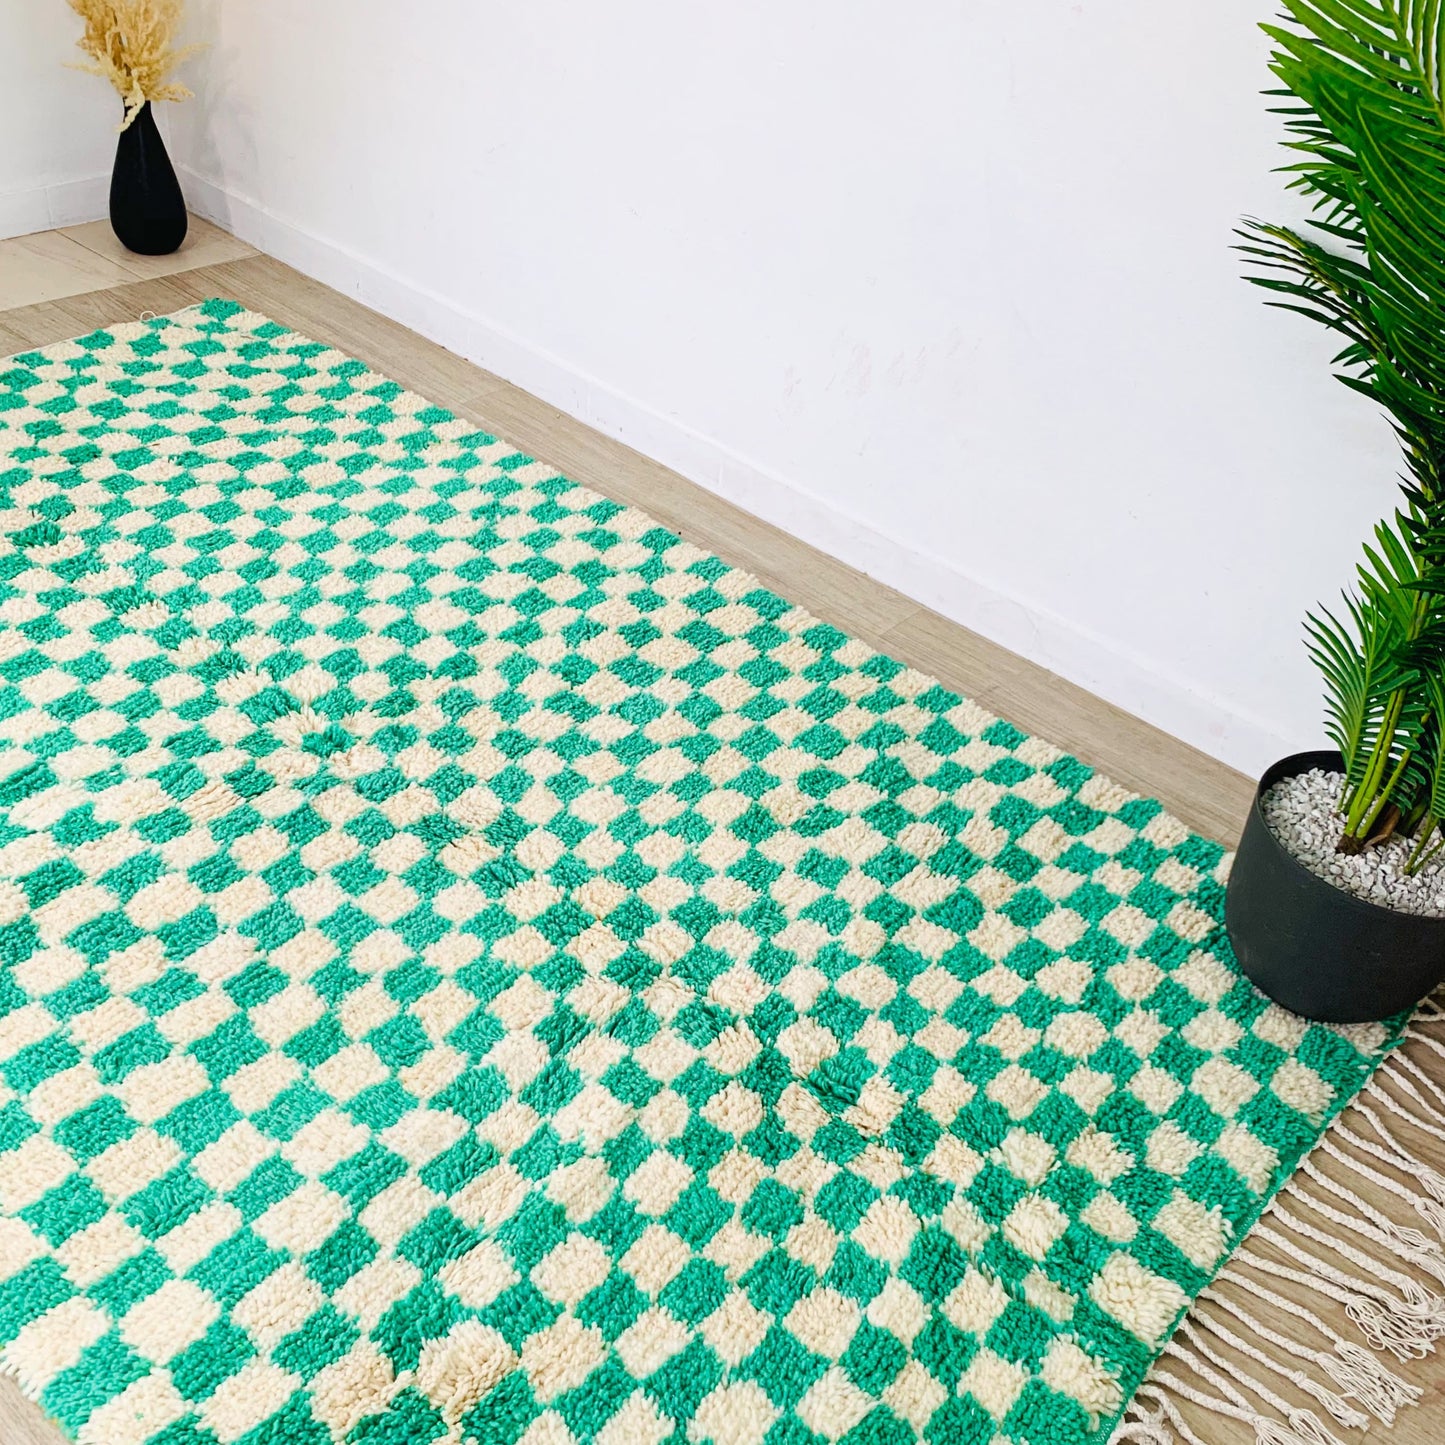 green-checkered-rug-in-living-room-in-Miami-florida-usa